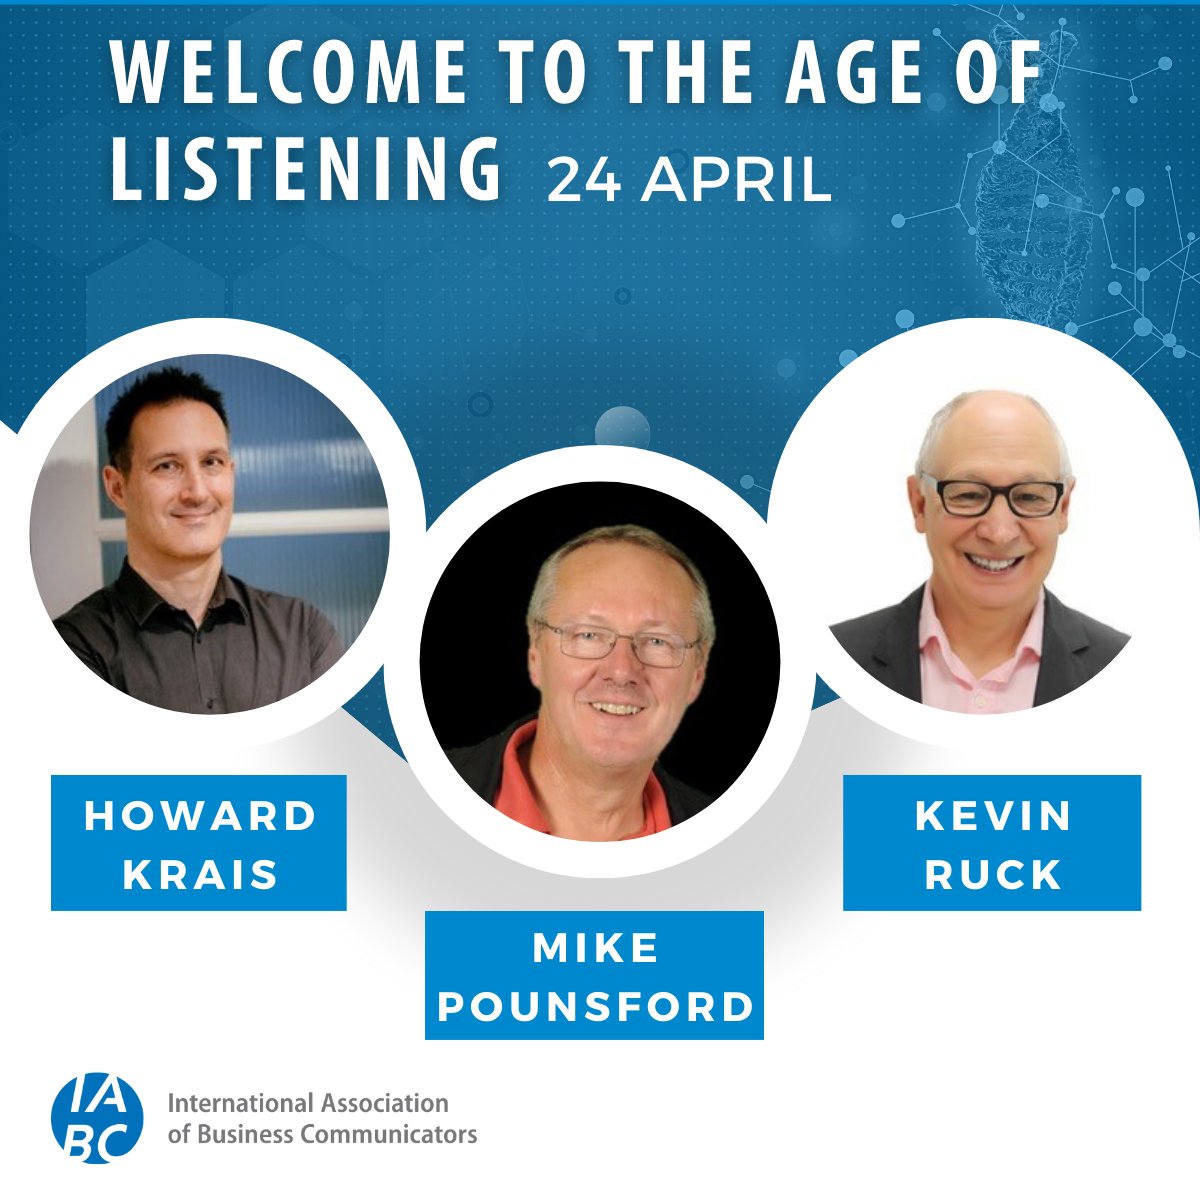 TOMORROW: All #IABC members are invited to an exclusive webinar at 11 AM CT on 24 April. Gain an understanding of the practices and processes that underpin effective listening in this free webinar with Howard Krais, Mike Pounsford and Dr. Kevin Ruck. hubs.ly/Q02tR-NJ0